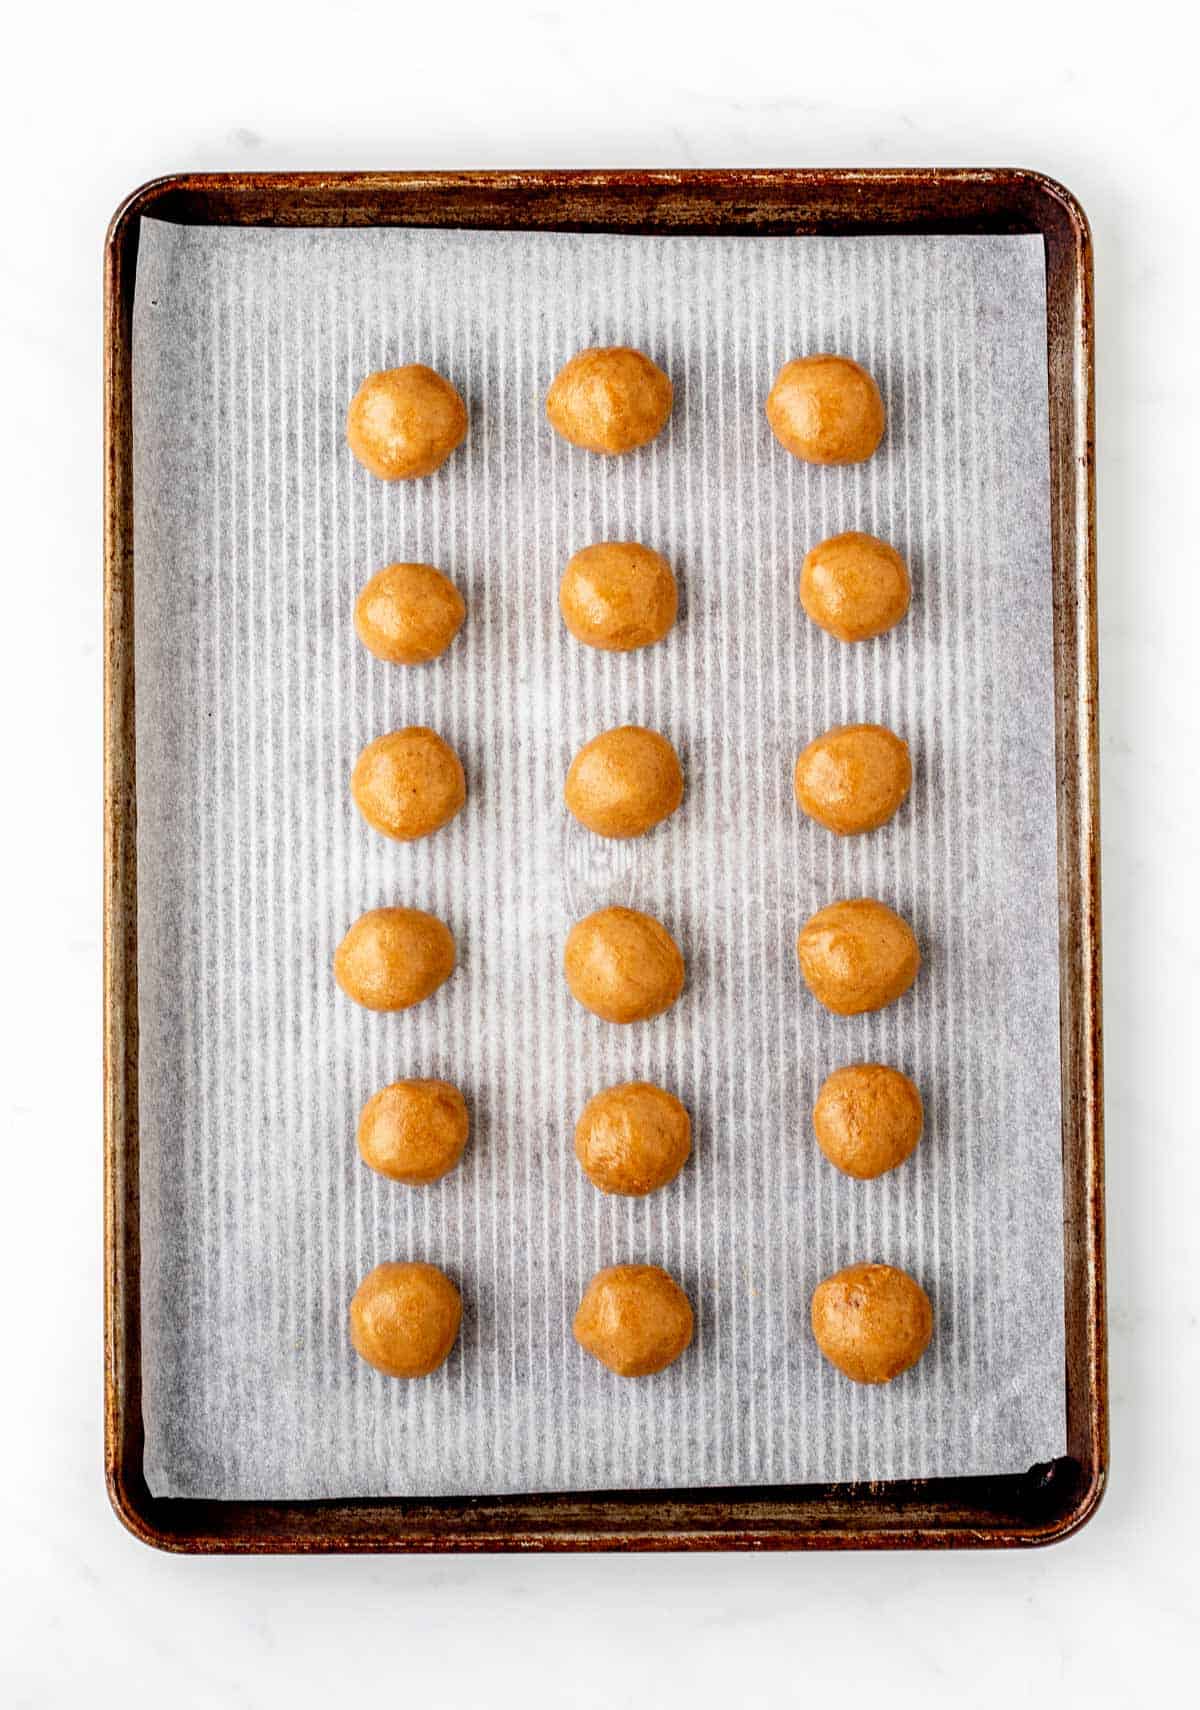 No bake peanut butter balls without powdered sugar lined up a baking sheet.